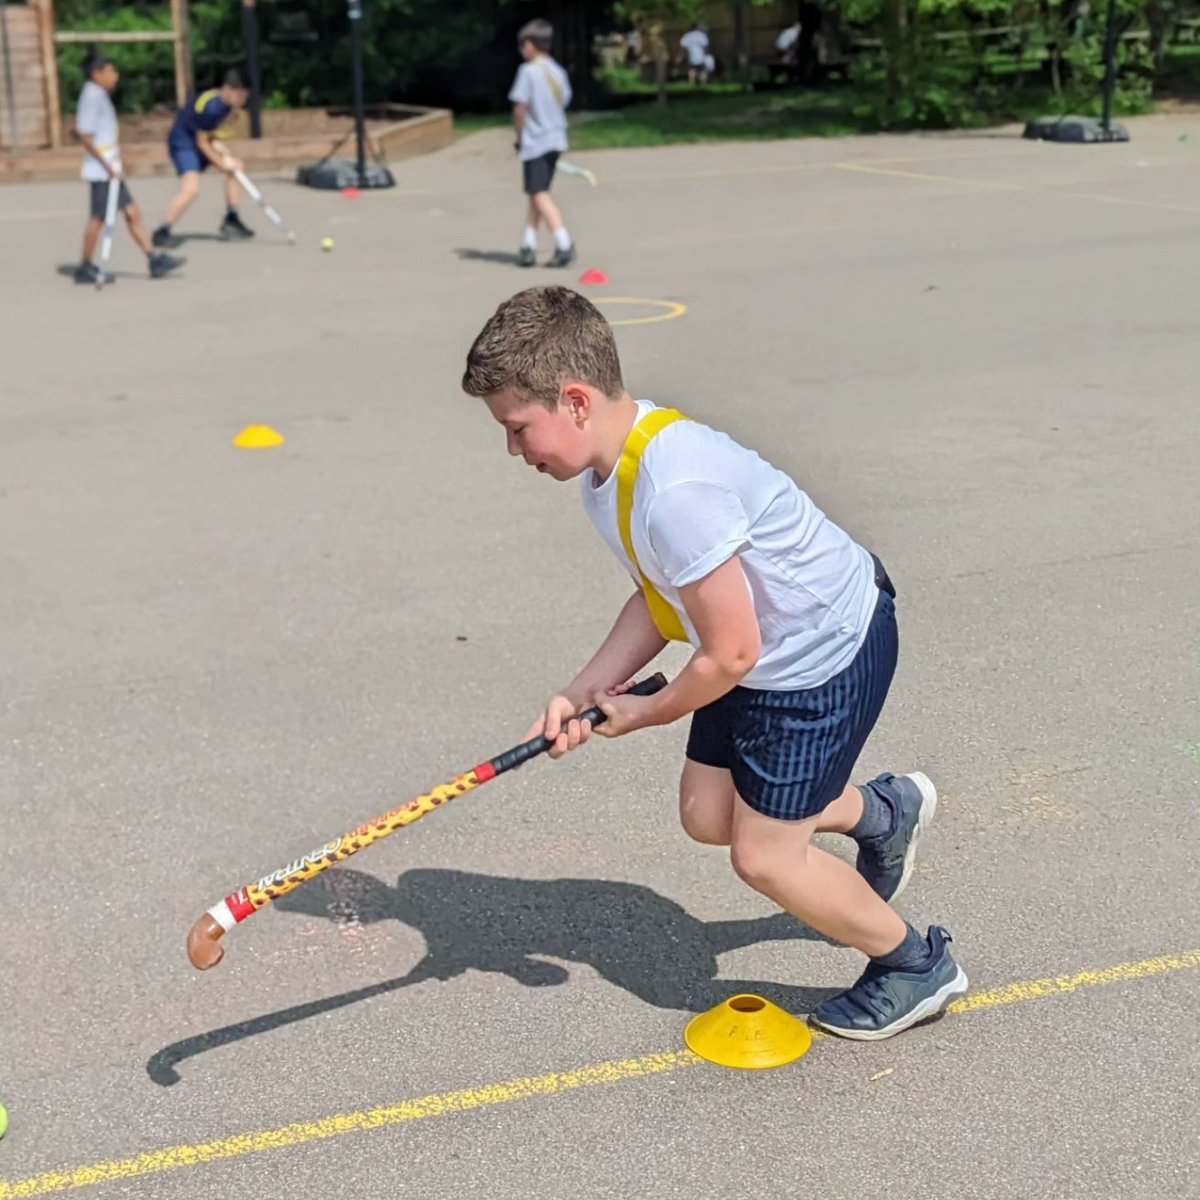 Some of our Year 6 pupils enjoyed hockey this afternoon while Poplar played golf on the field! Great skills shown by  everyone involved ⛳ 🏑